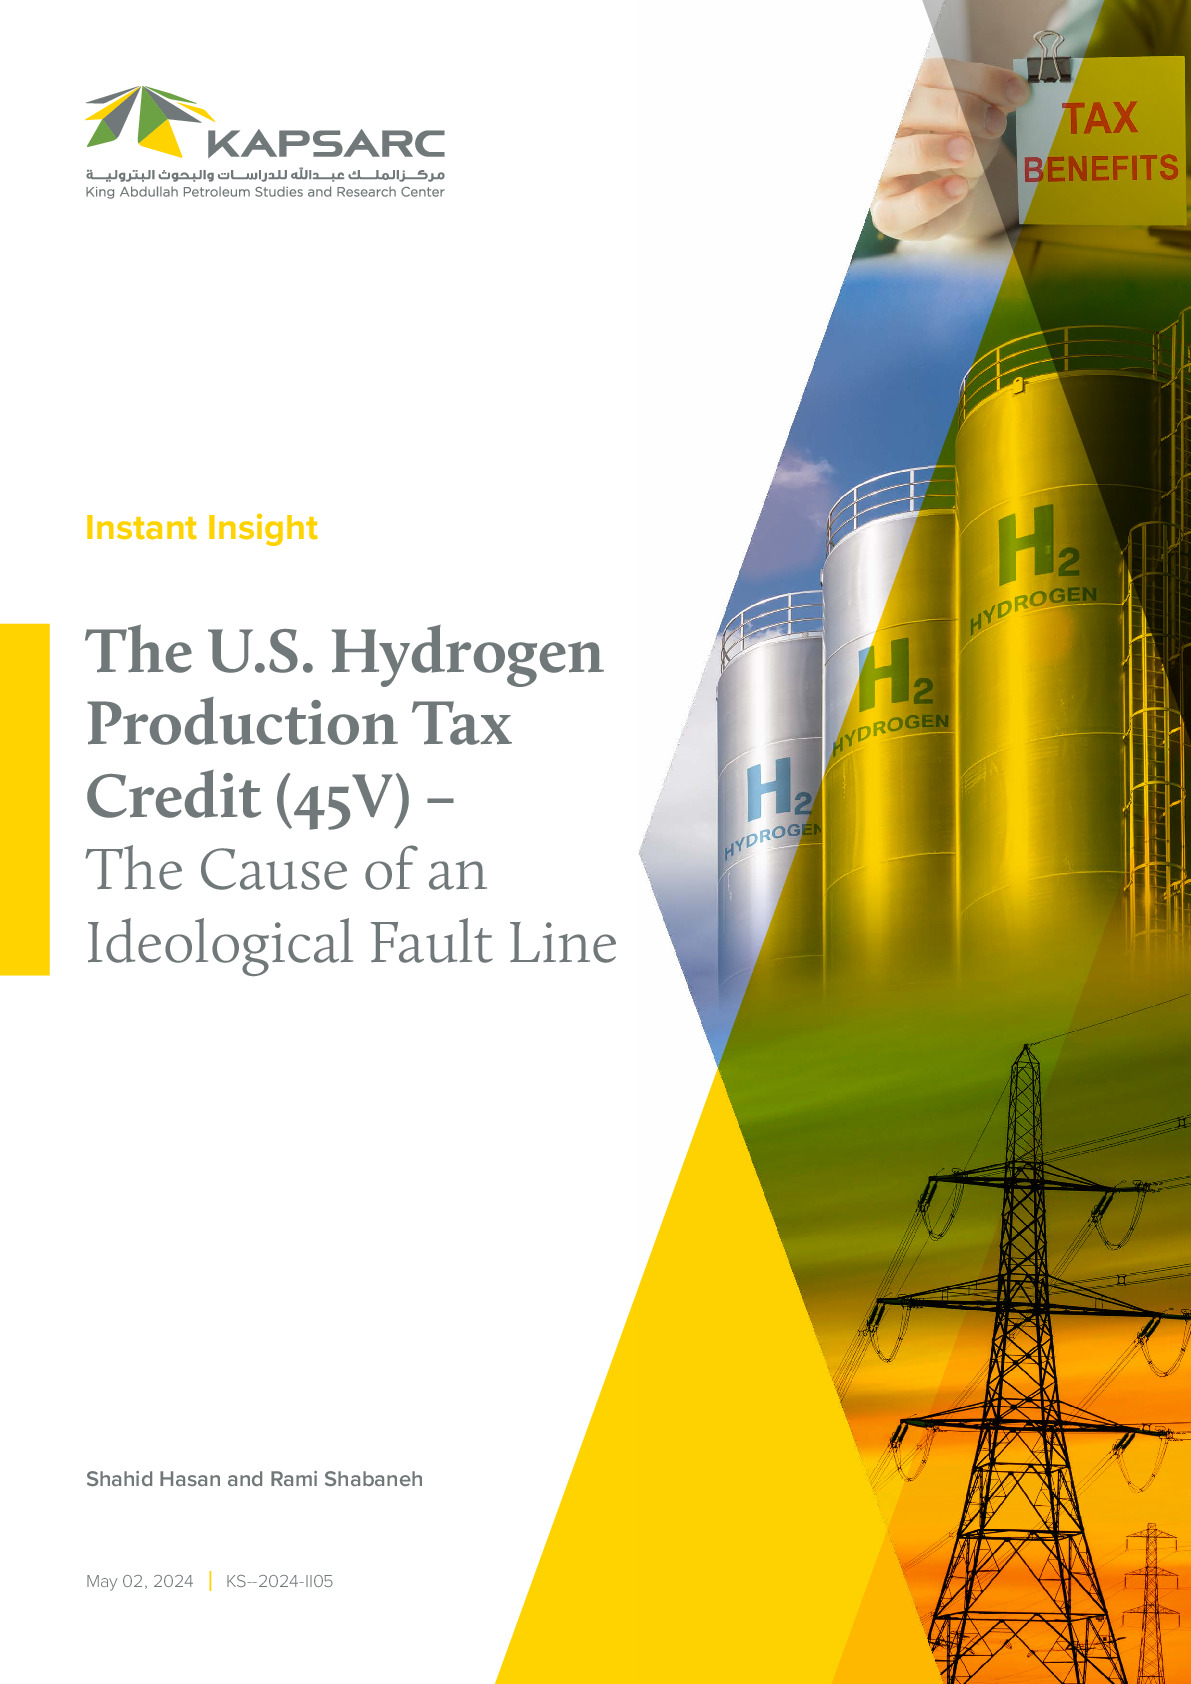 The U.S. Hydrogen Production Tax Credit (45V) – The Cause of an Ideological Fault Line